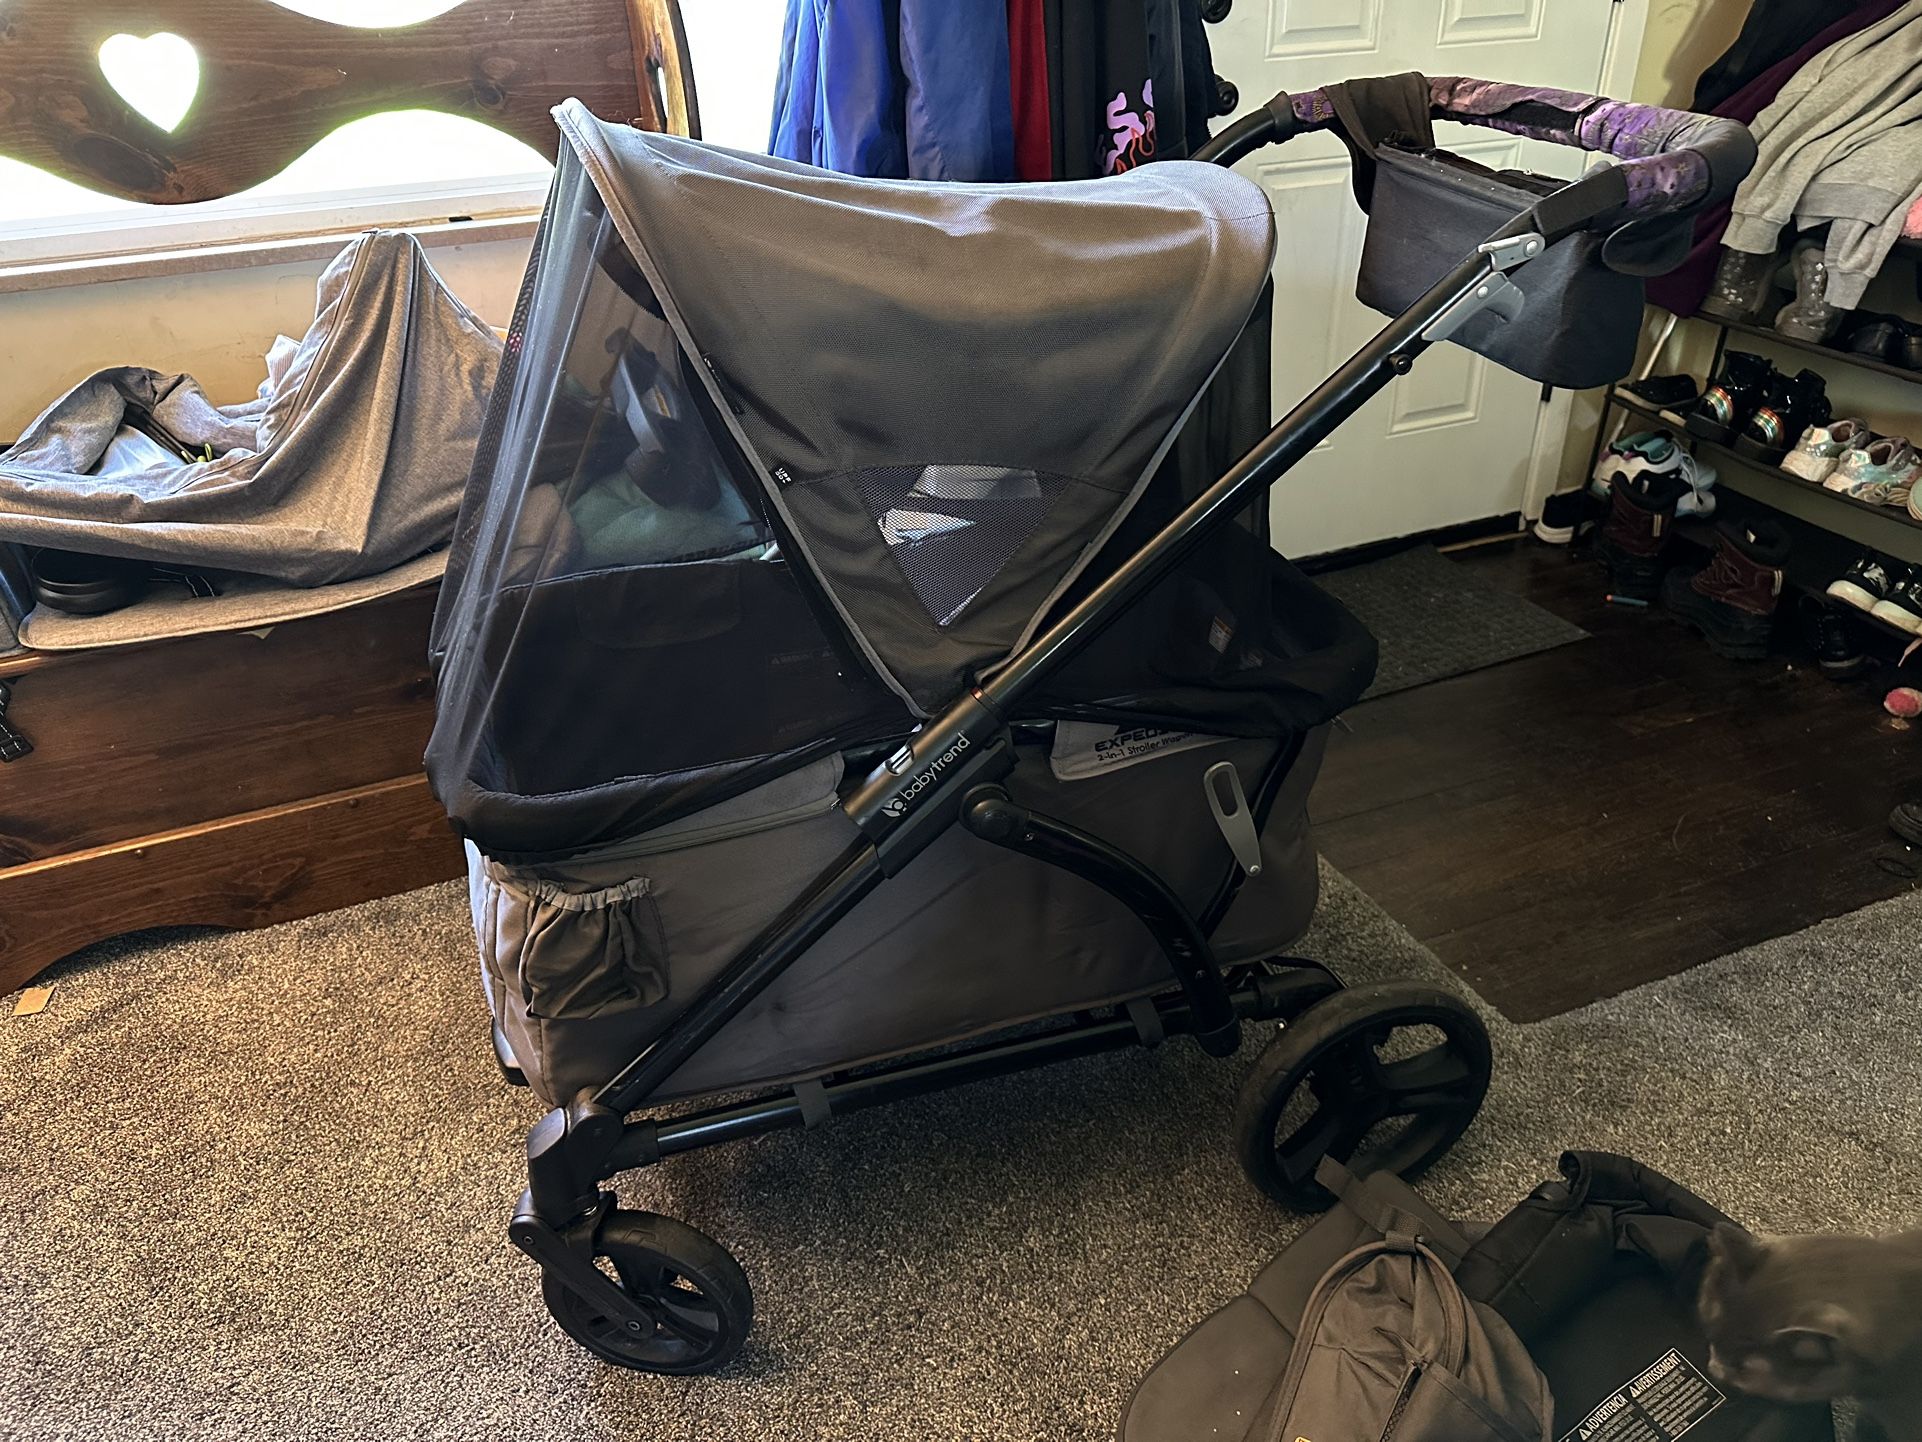 Babytrend 2 In 1 Expedition Plus Stroller Wagon